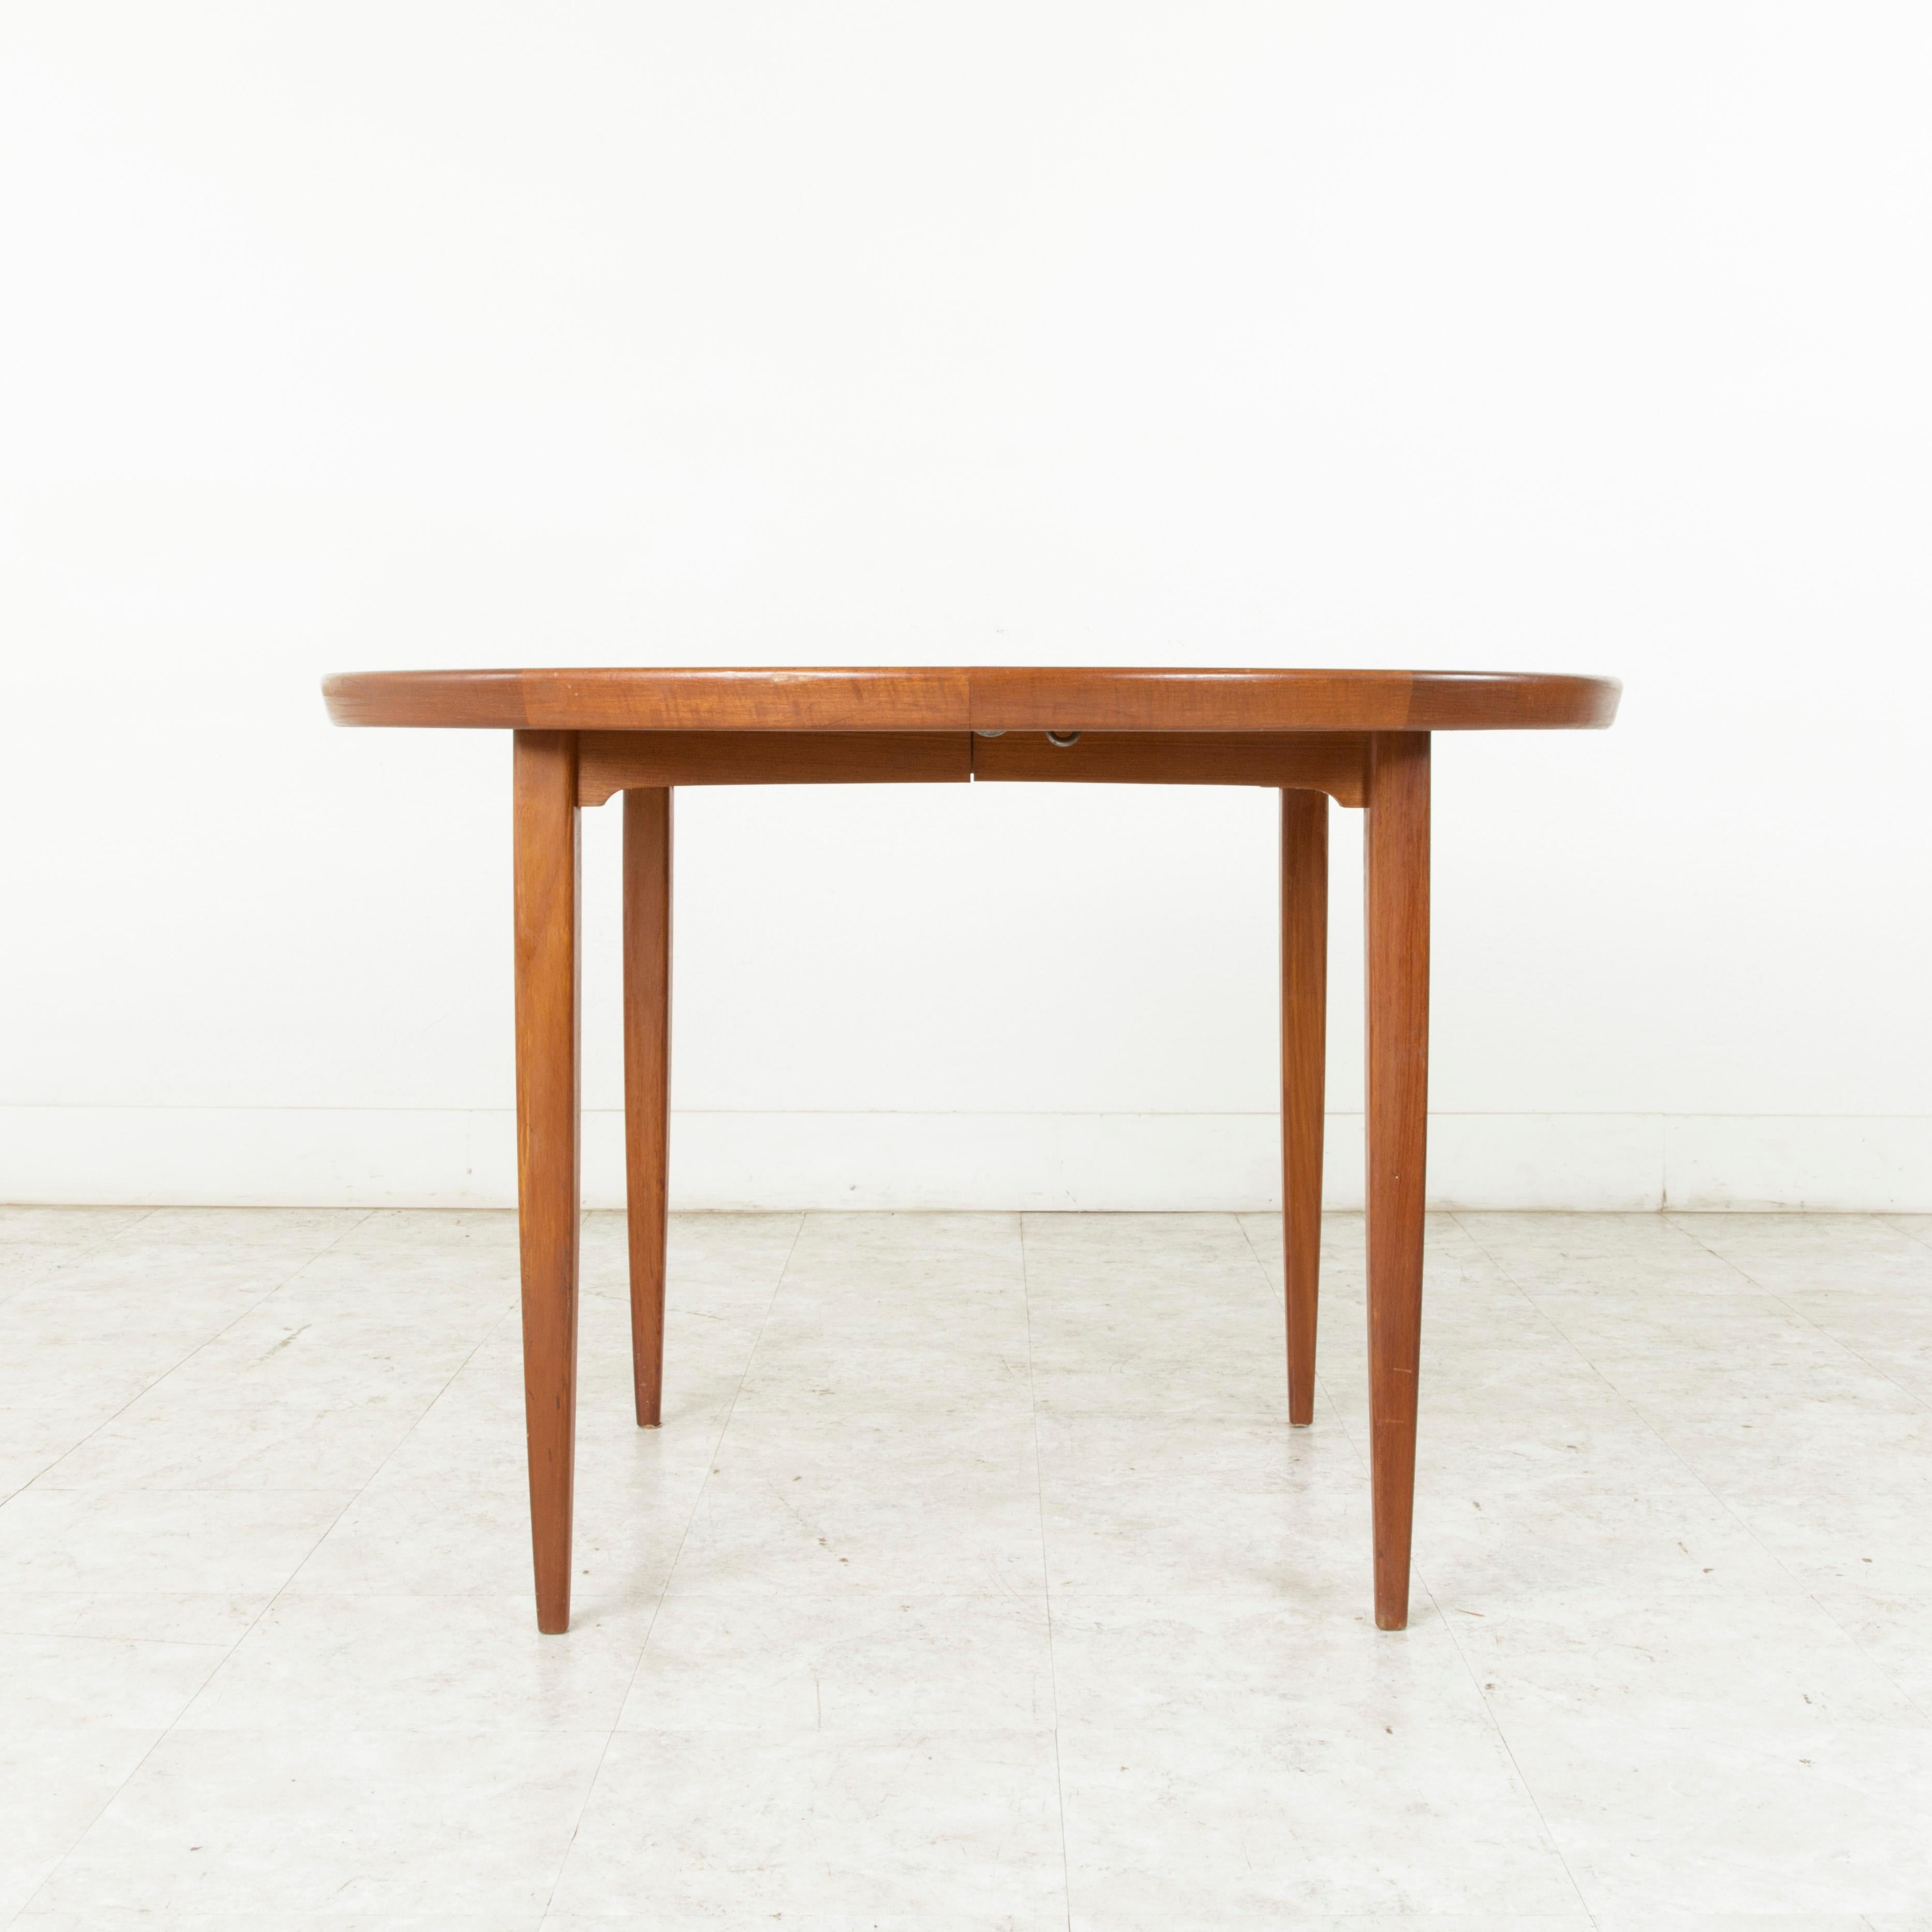 Midcentury Danish Round Teak Table and Four Chairs by Niels Koefoed, Hornslet 1